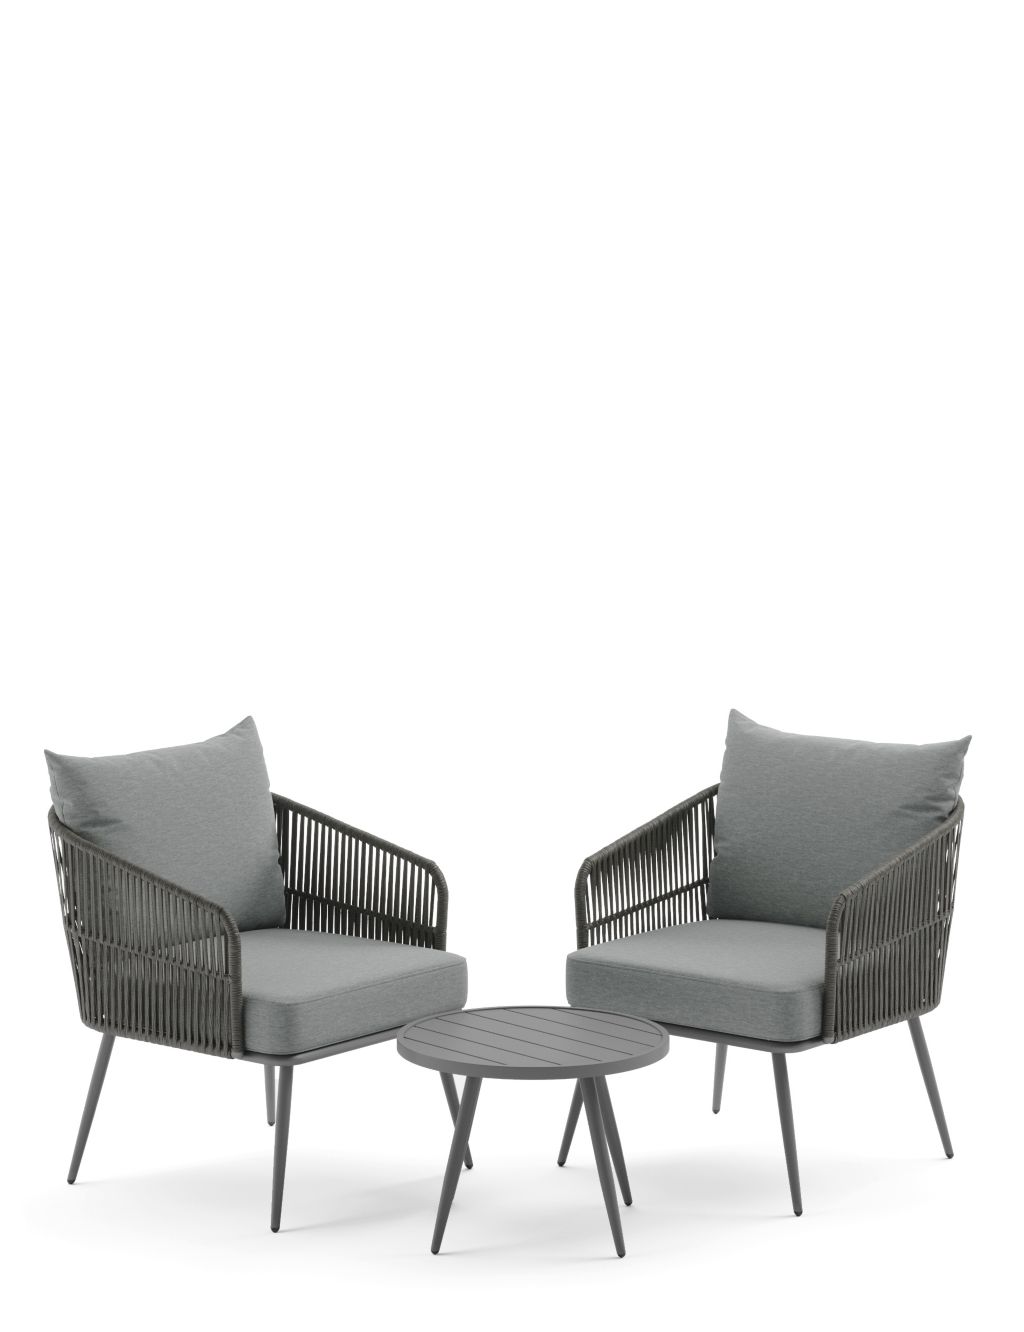 Melbourne 2 Seater Bistro Table & Chairs